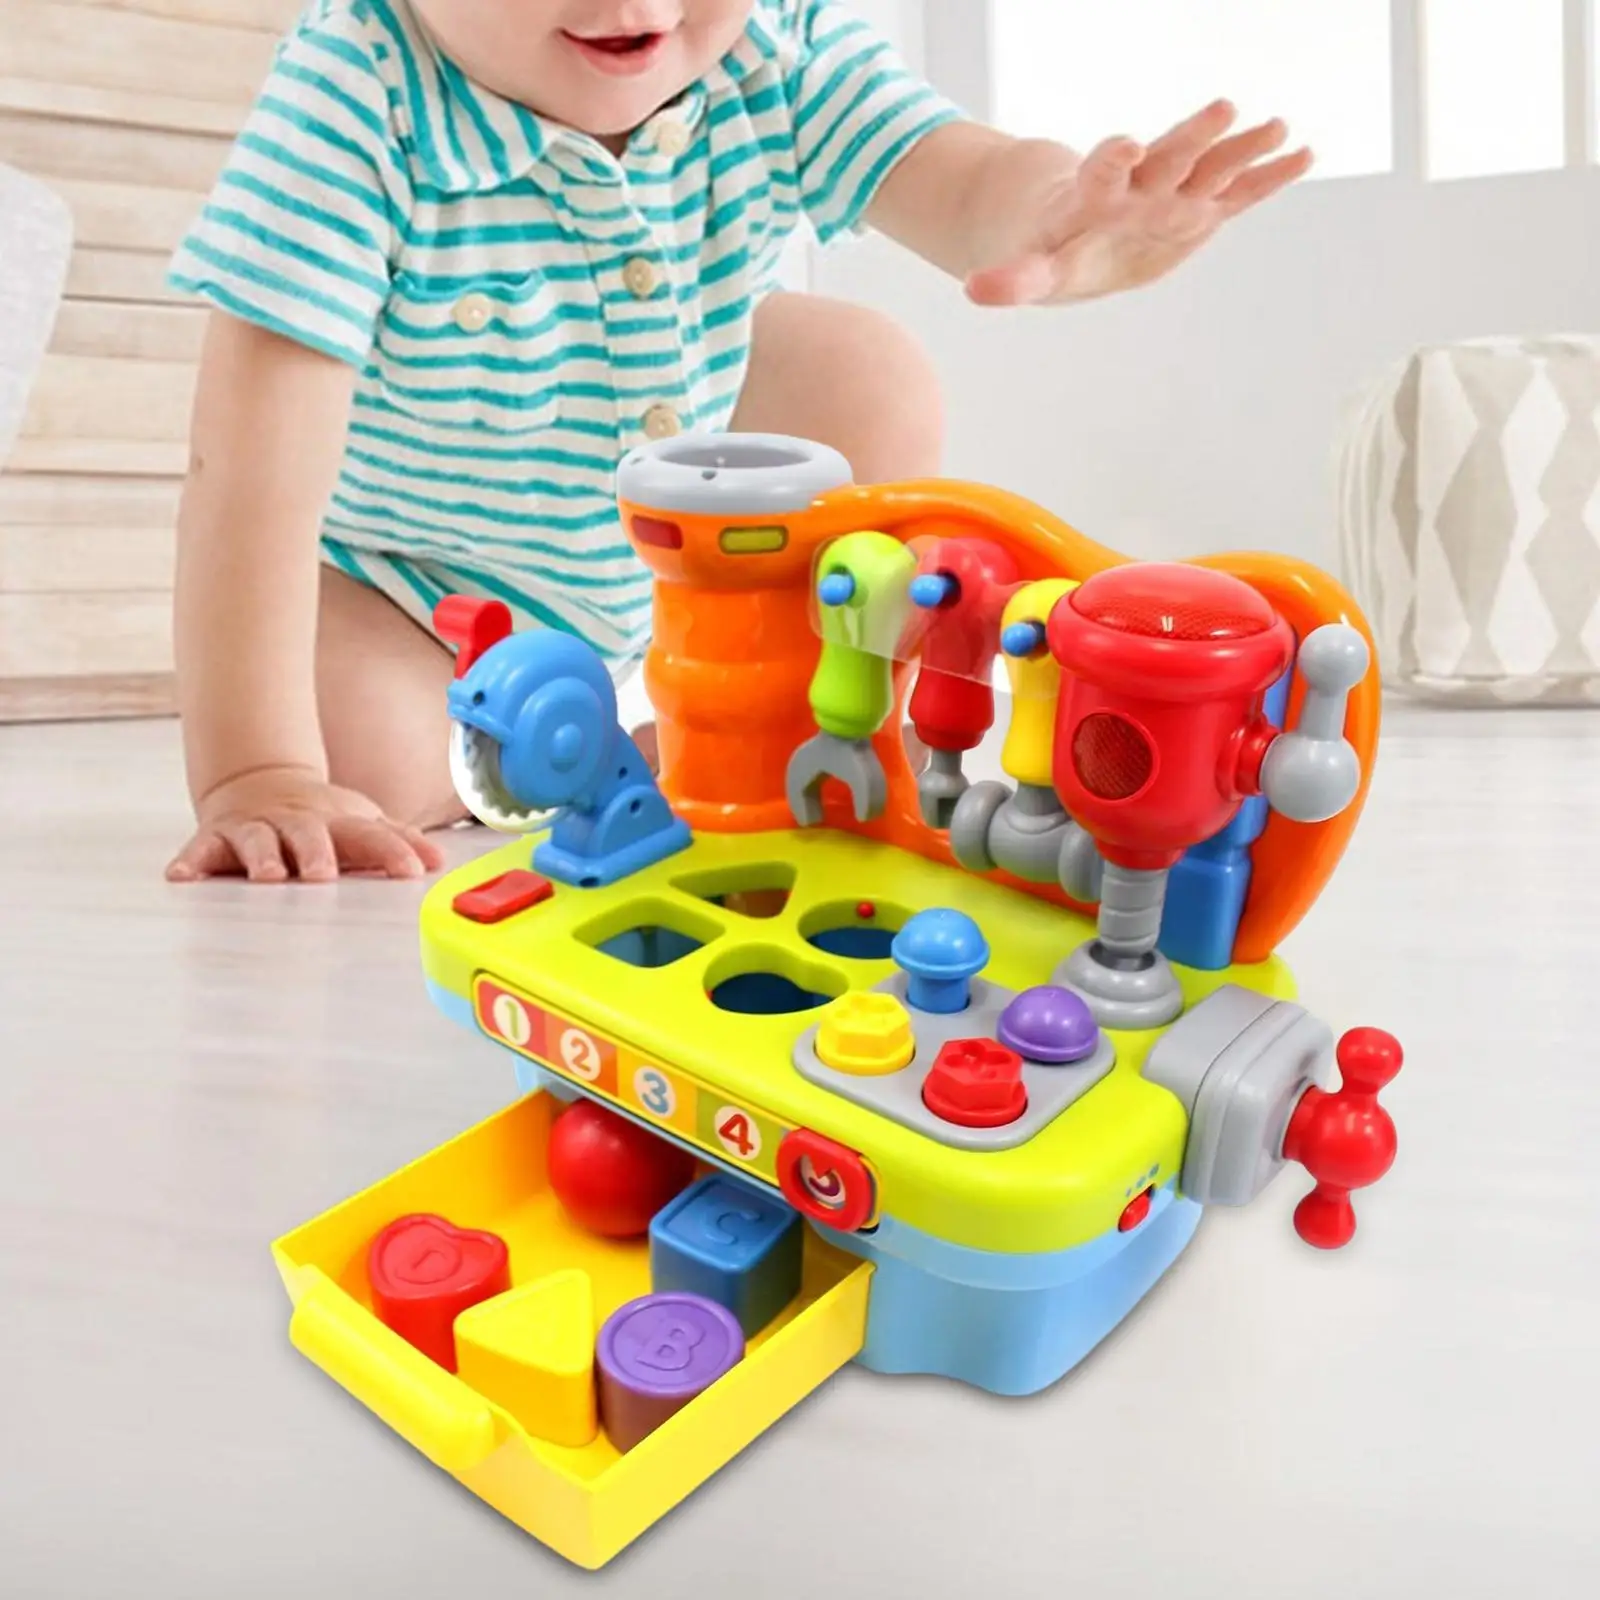 Musical Workbench Toys Developing Early Educational Work Station DIY Motor Skills Toddler Boys Interactive Play Activity